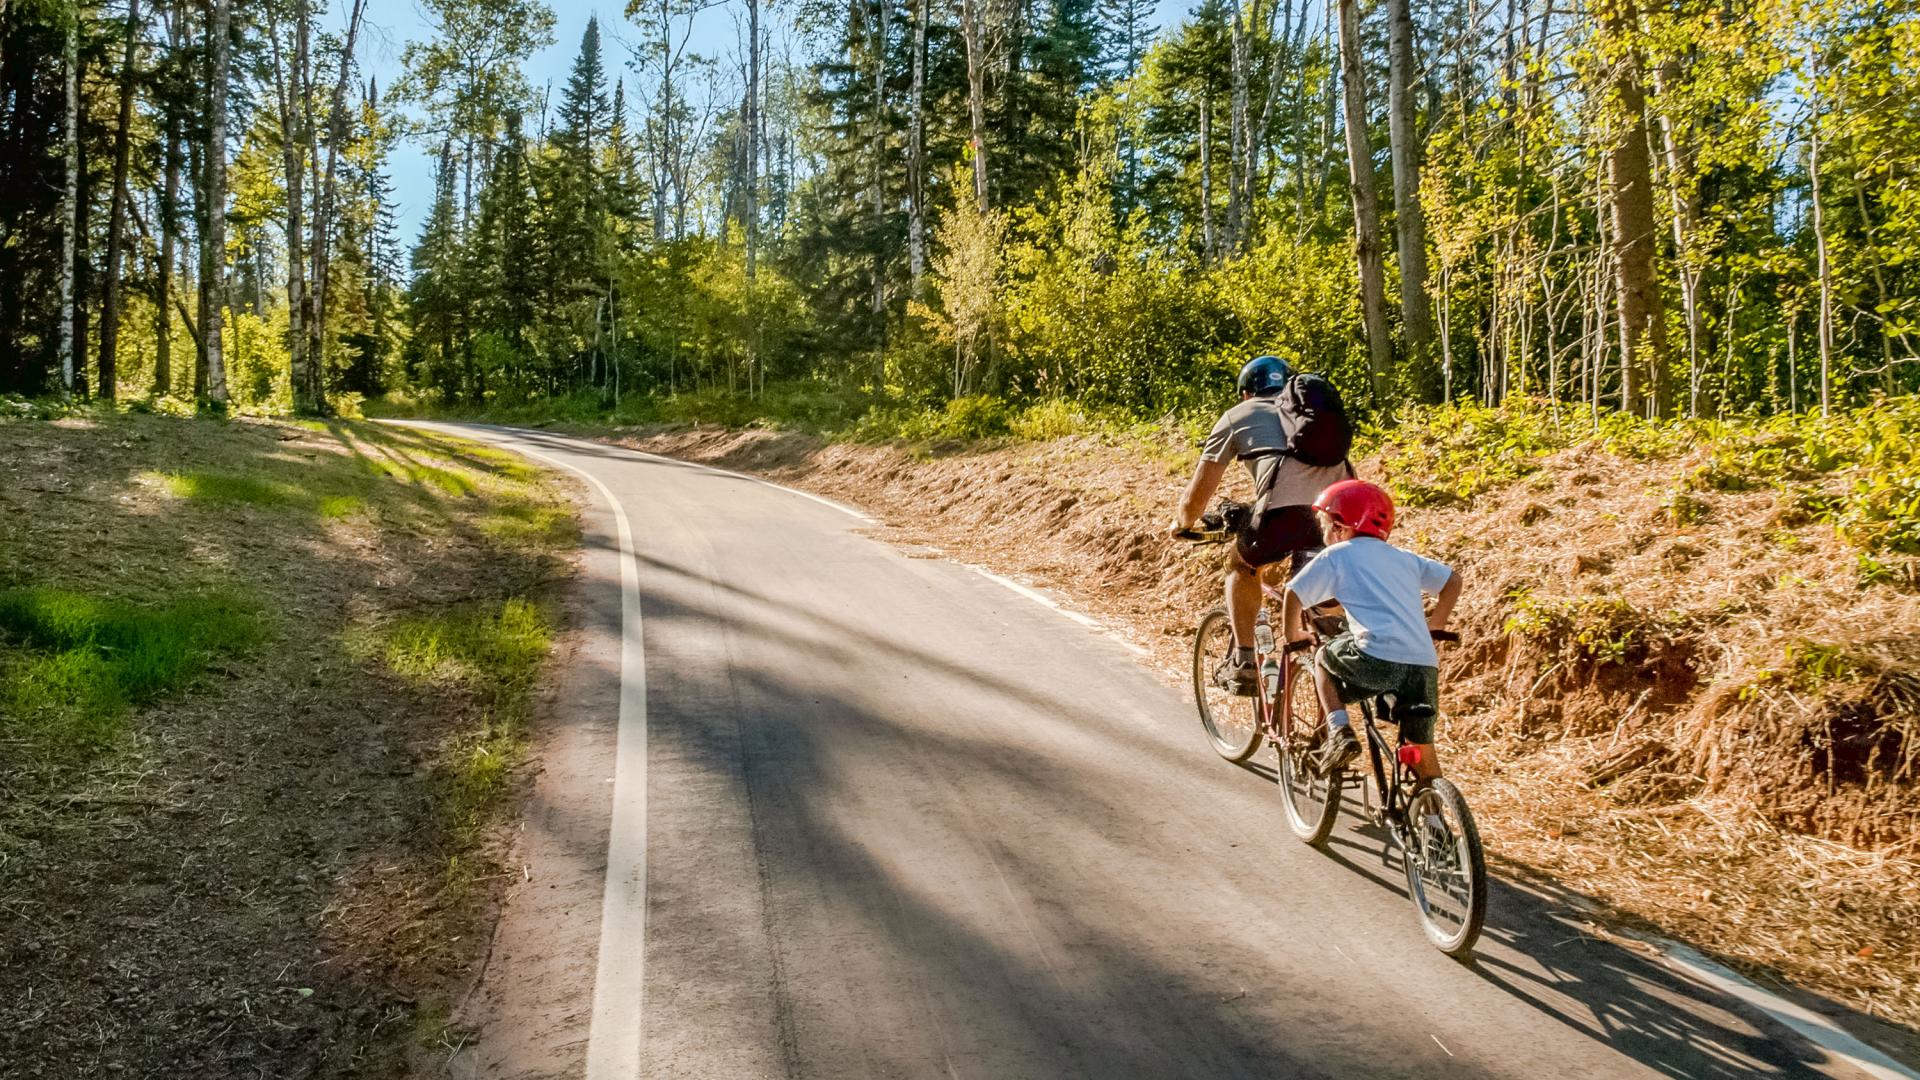 Visit some of the best bike trails